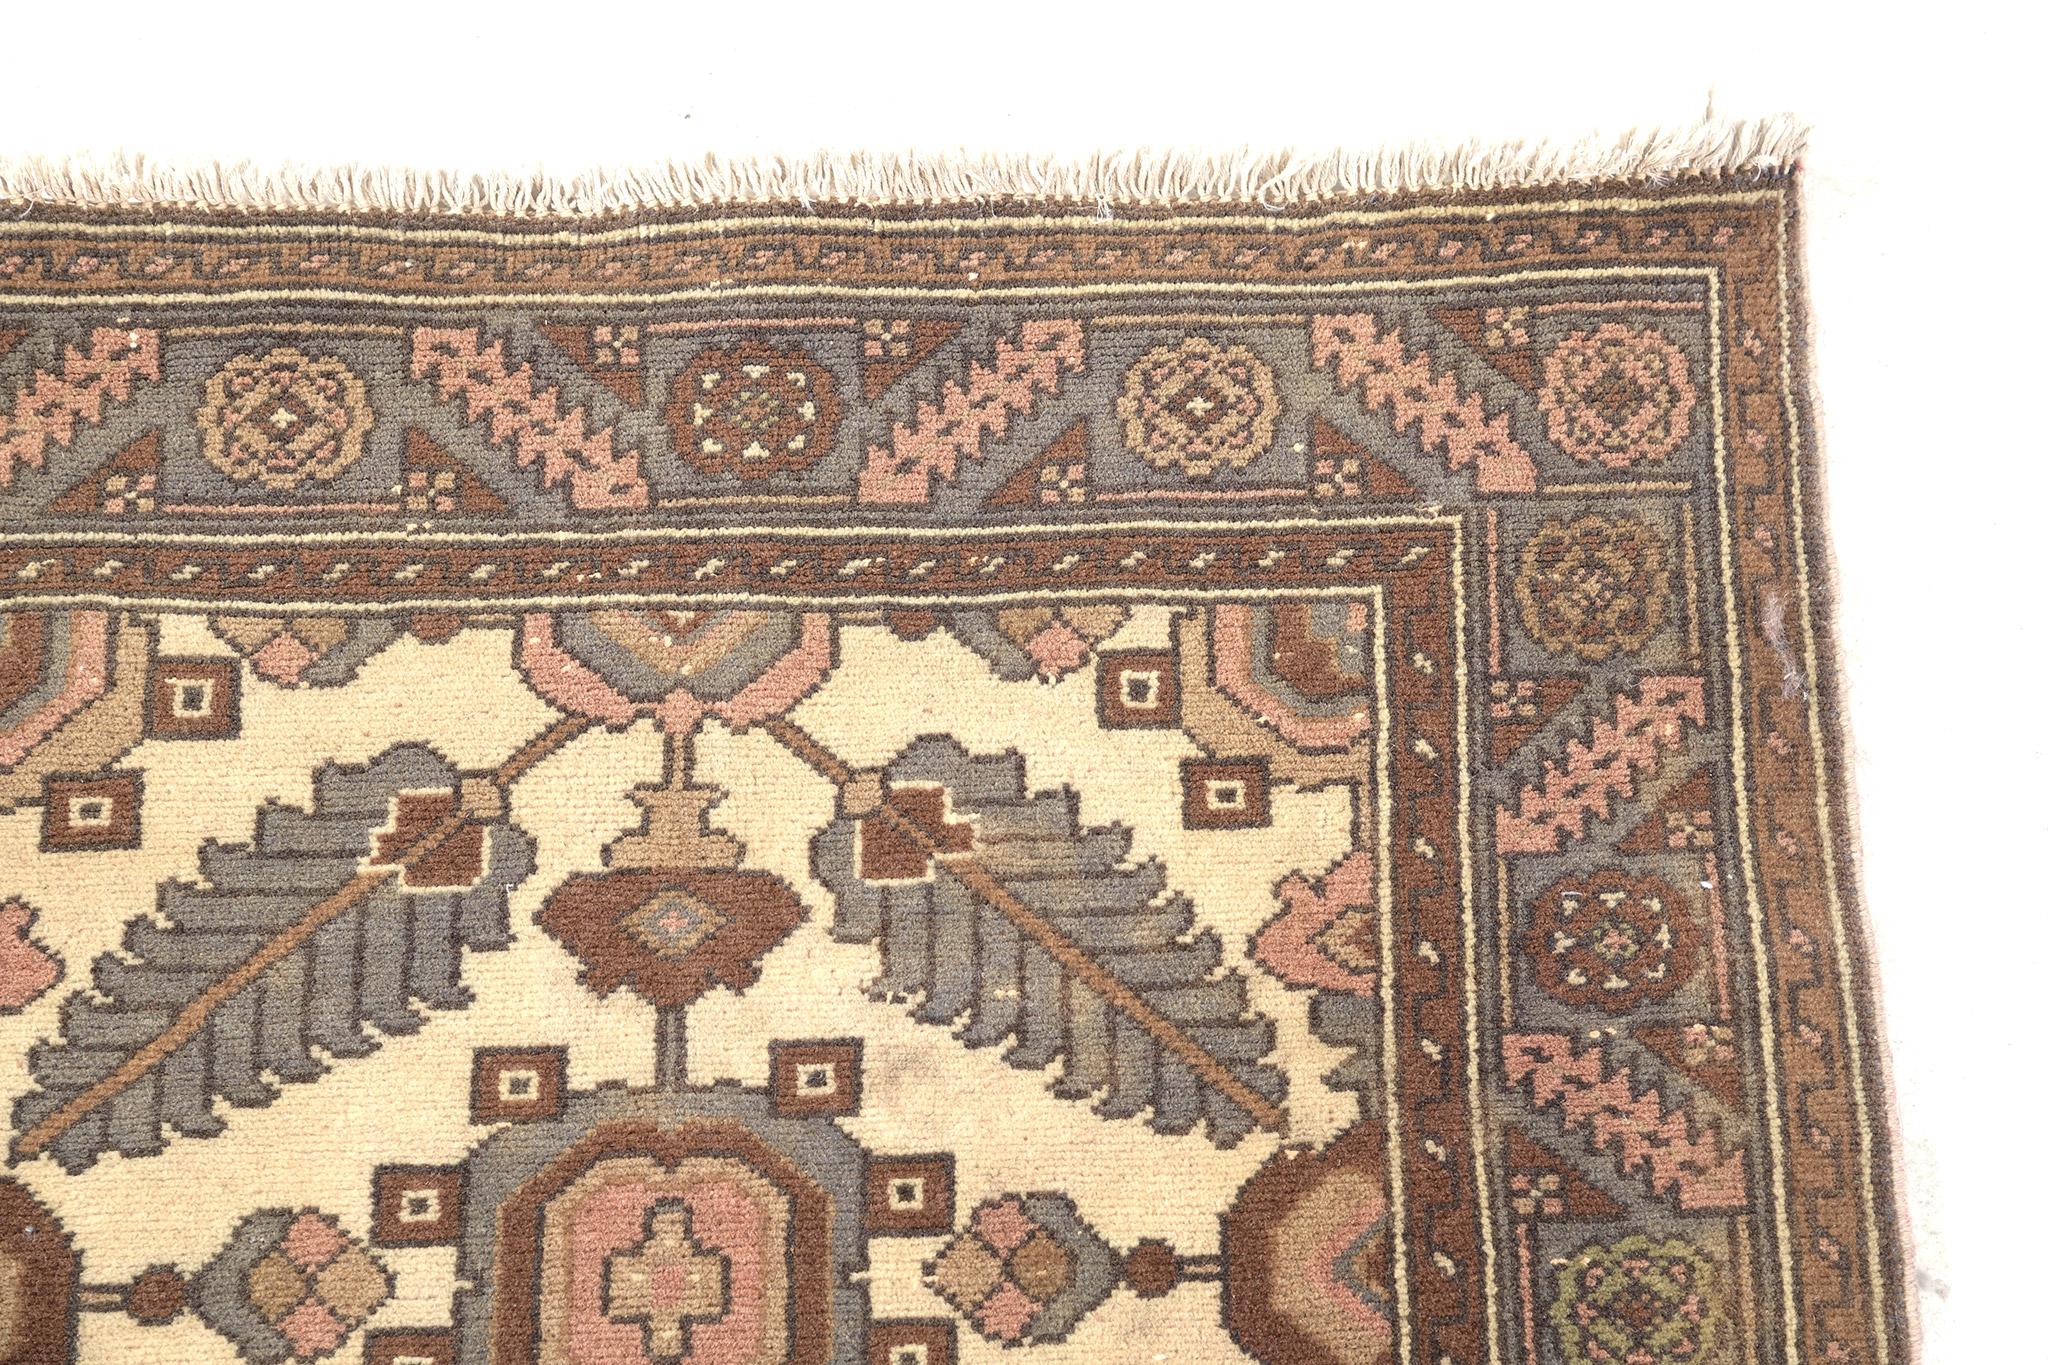 This stunning Lilihan runner features broad flourishes of symmetrical patterns in sage blue, brick red, umber brown, and olive green accents with a cream field. One of the best Persian runners in our store because of its durability can be passed on